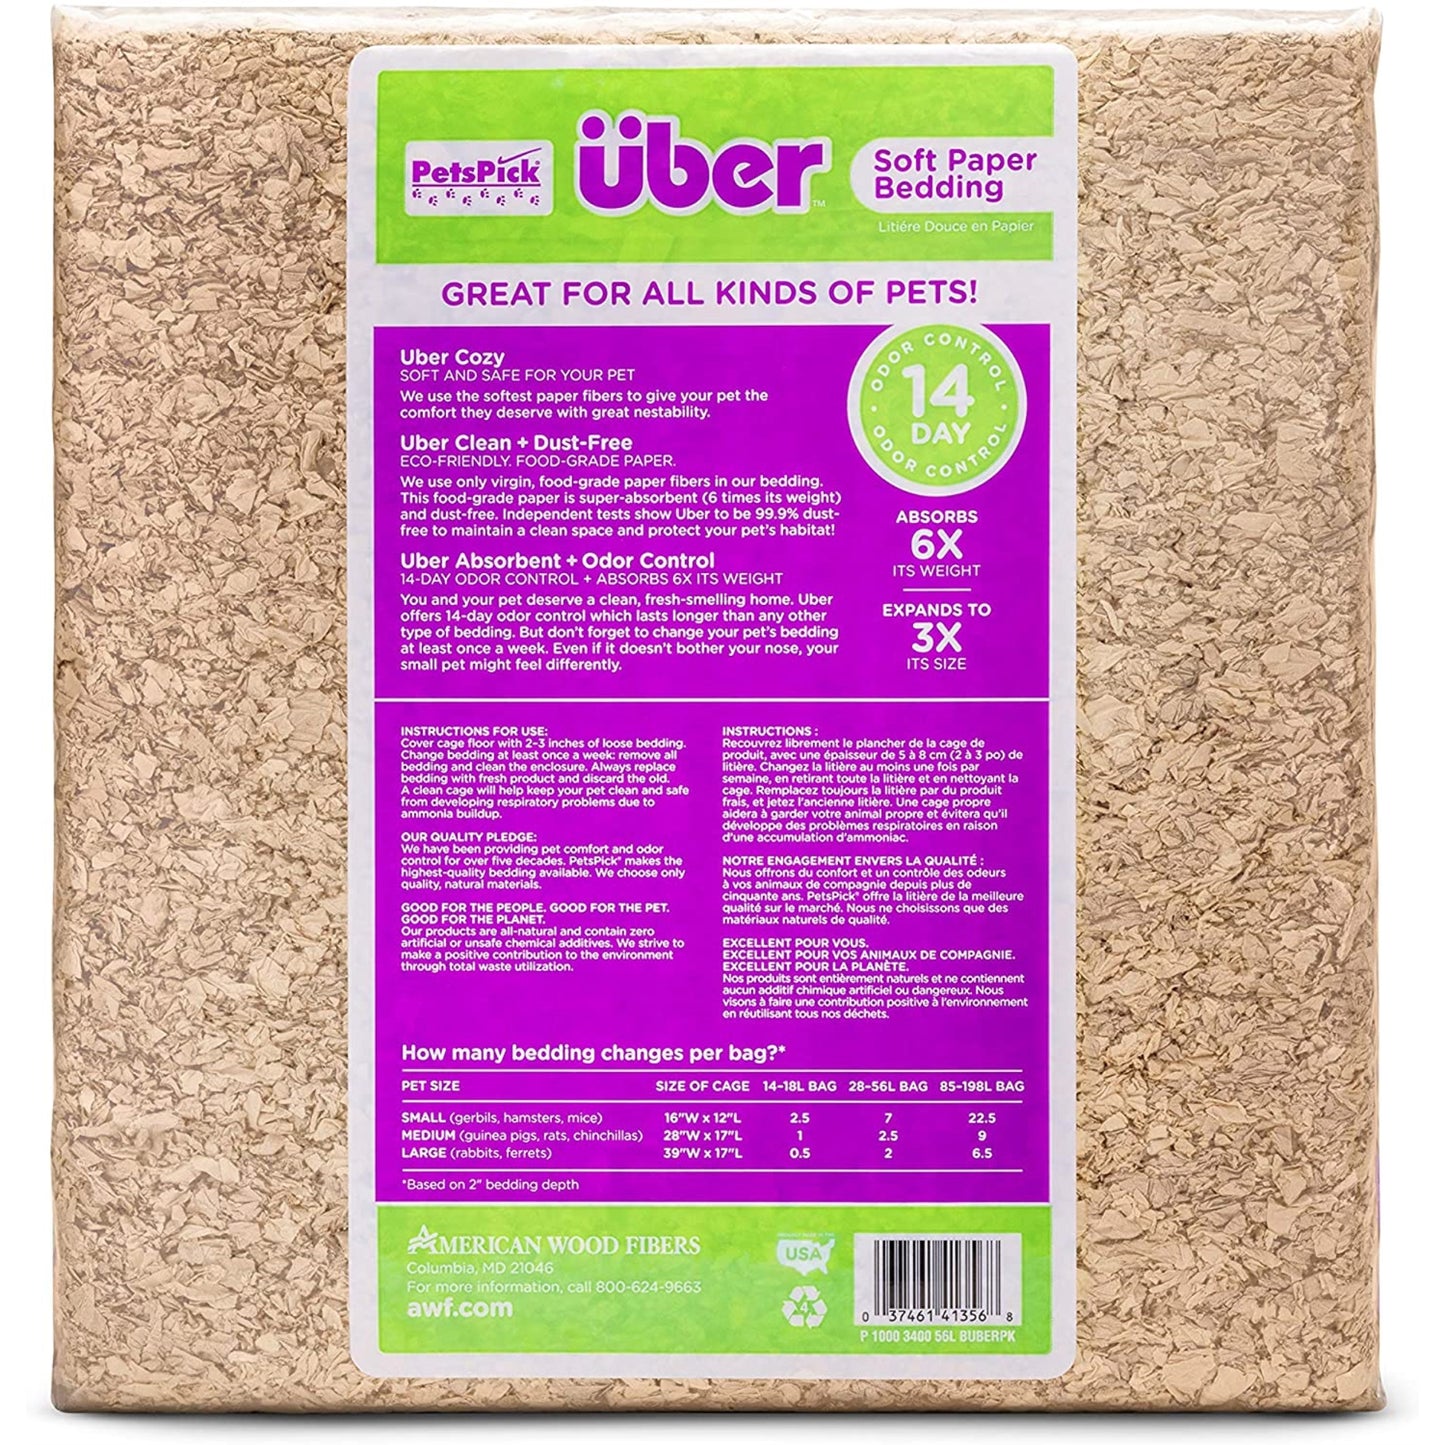 Petspick Uber Soft Paper Pet Bedding for Small Animals, Natural 56L